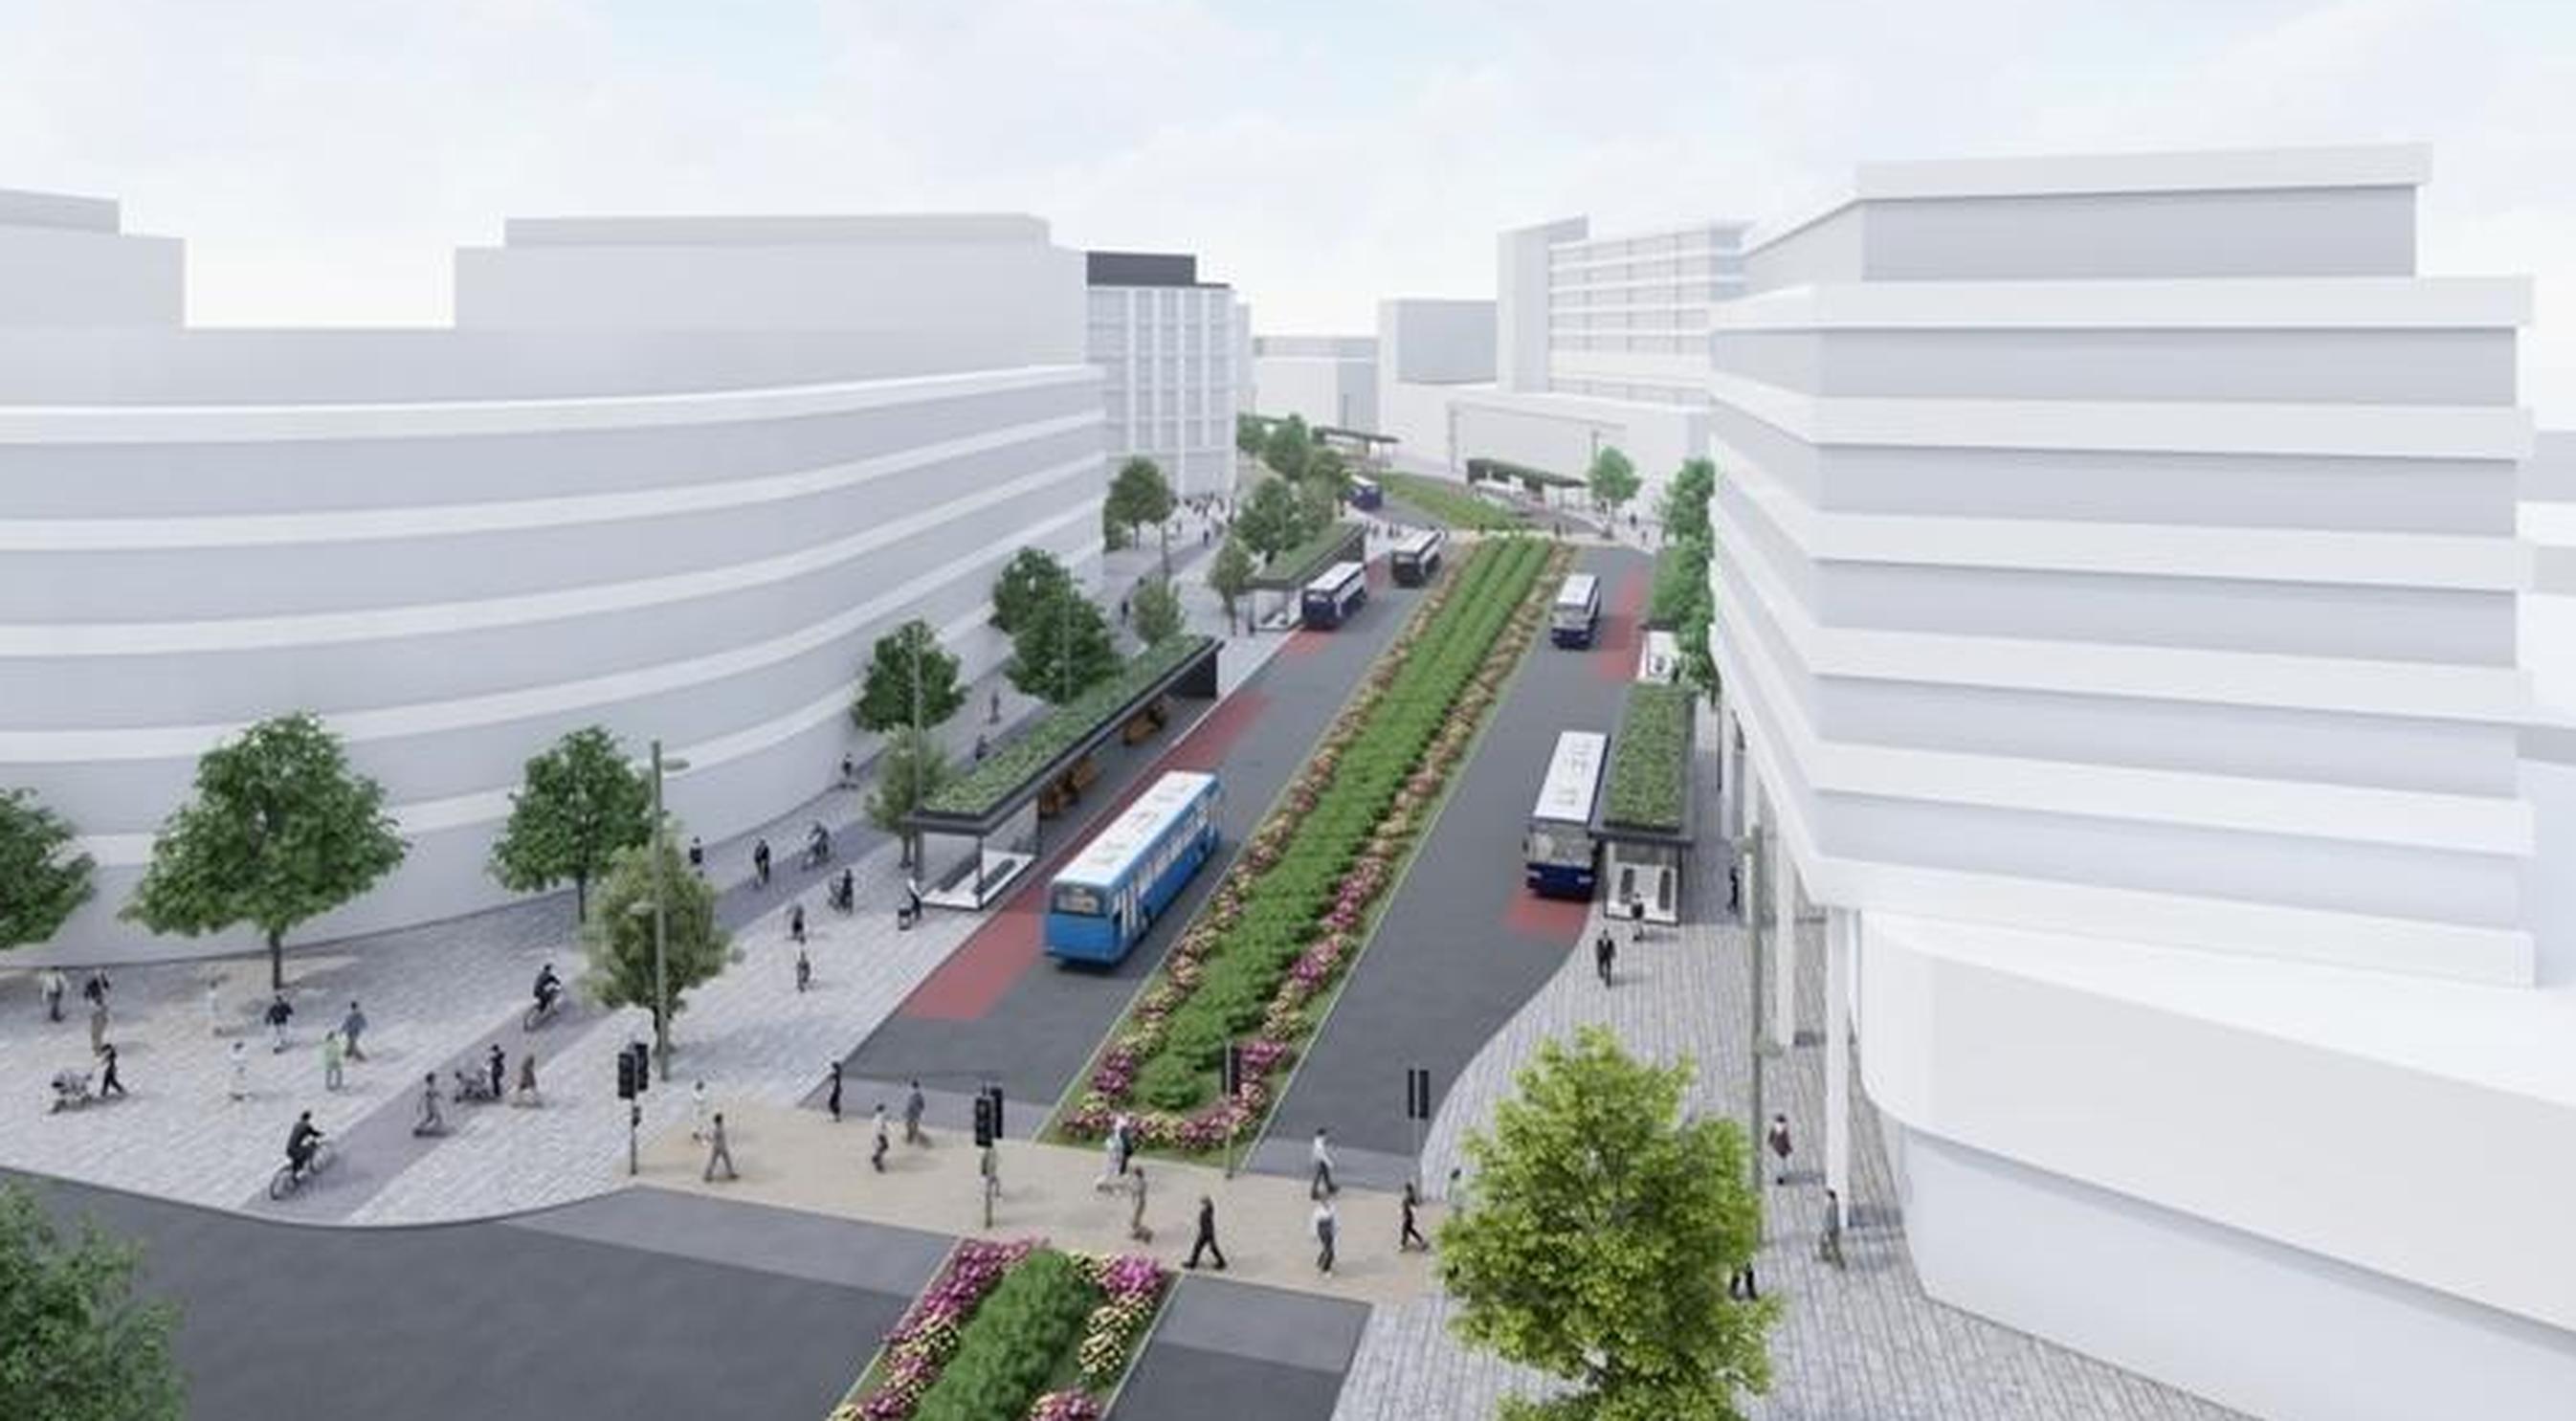 Swindon Borough Council will use £25m from Future High Street fund to turn a dual carriageway road between the rail station and town centre into a ‘bus boulevard’